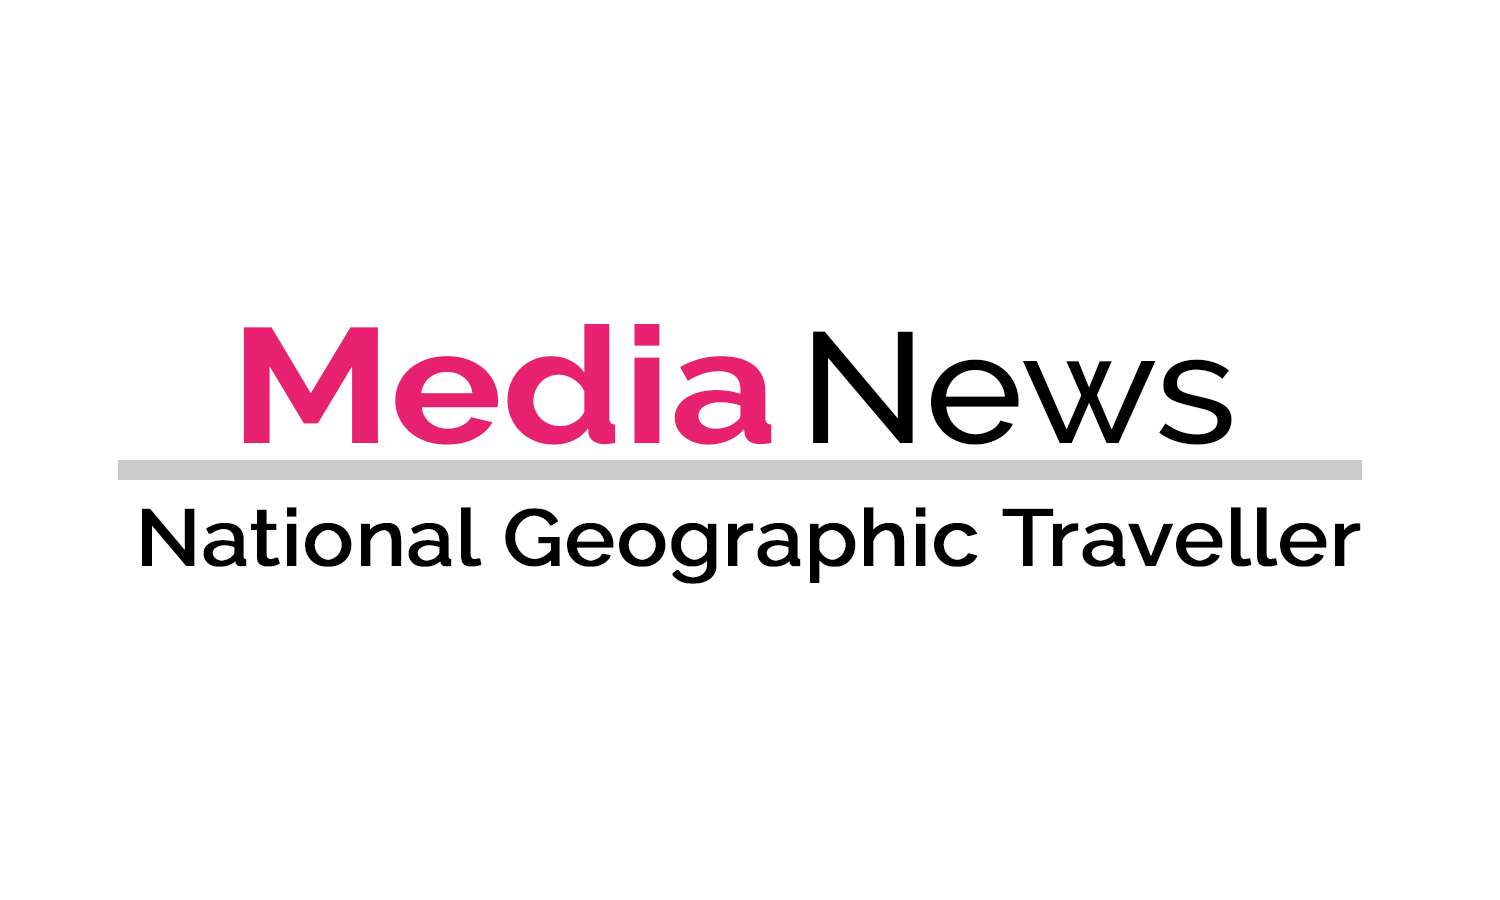 National Geographic Traveller appoints deputy editor